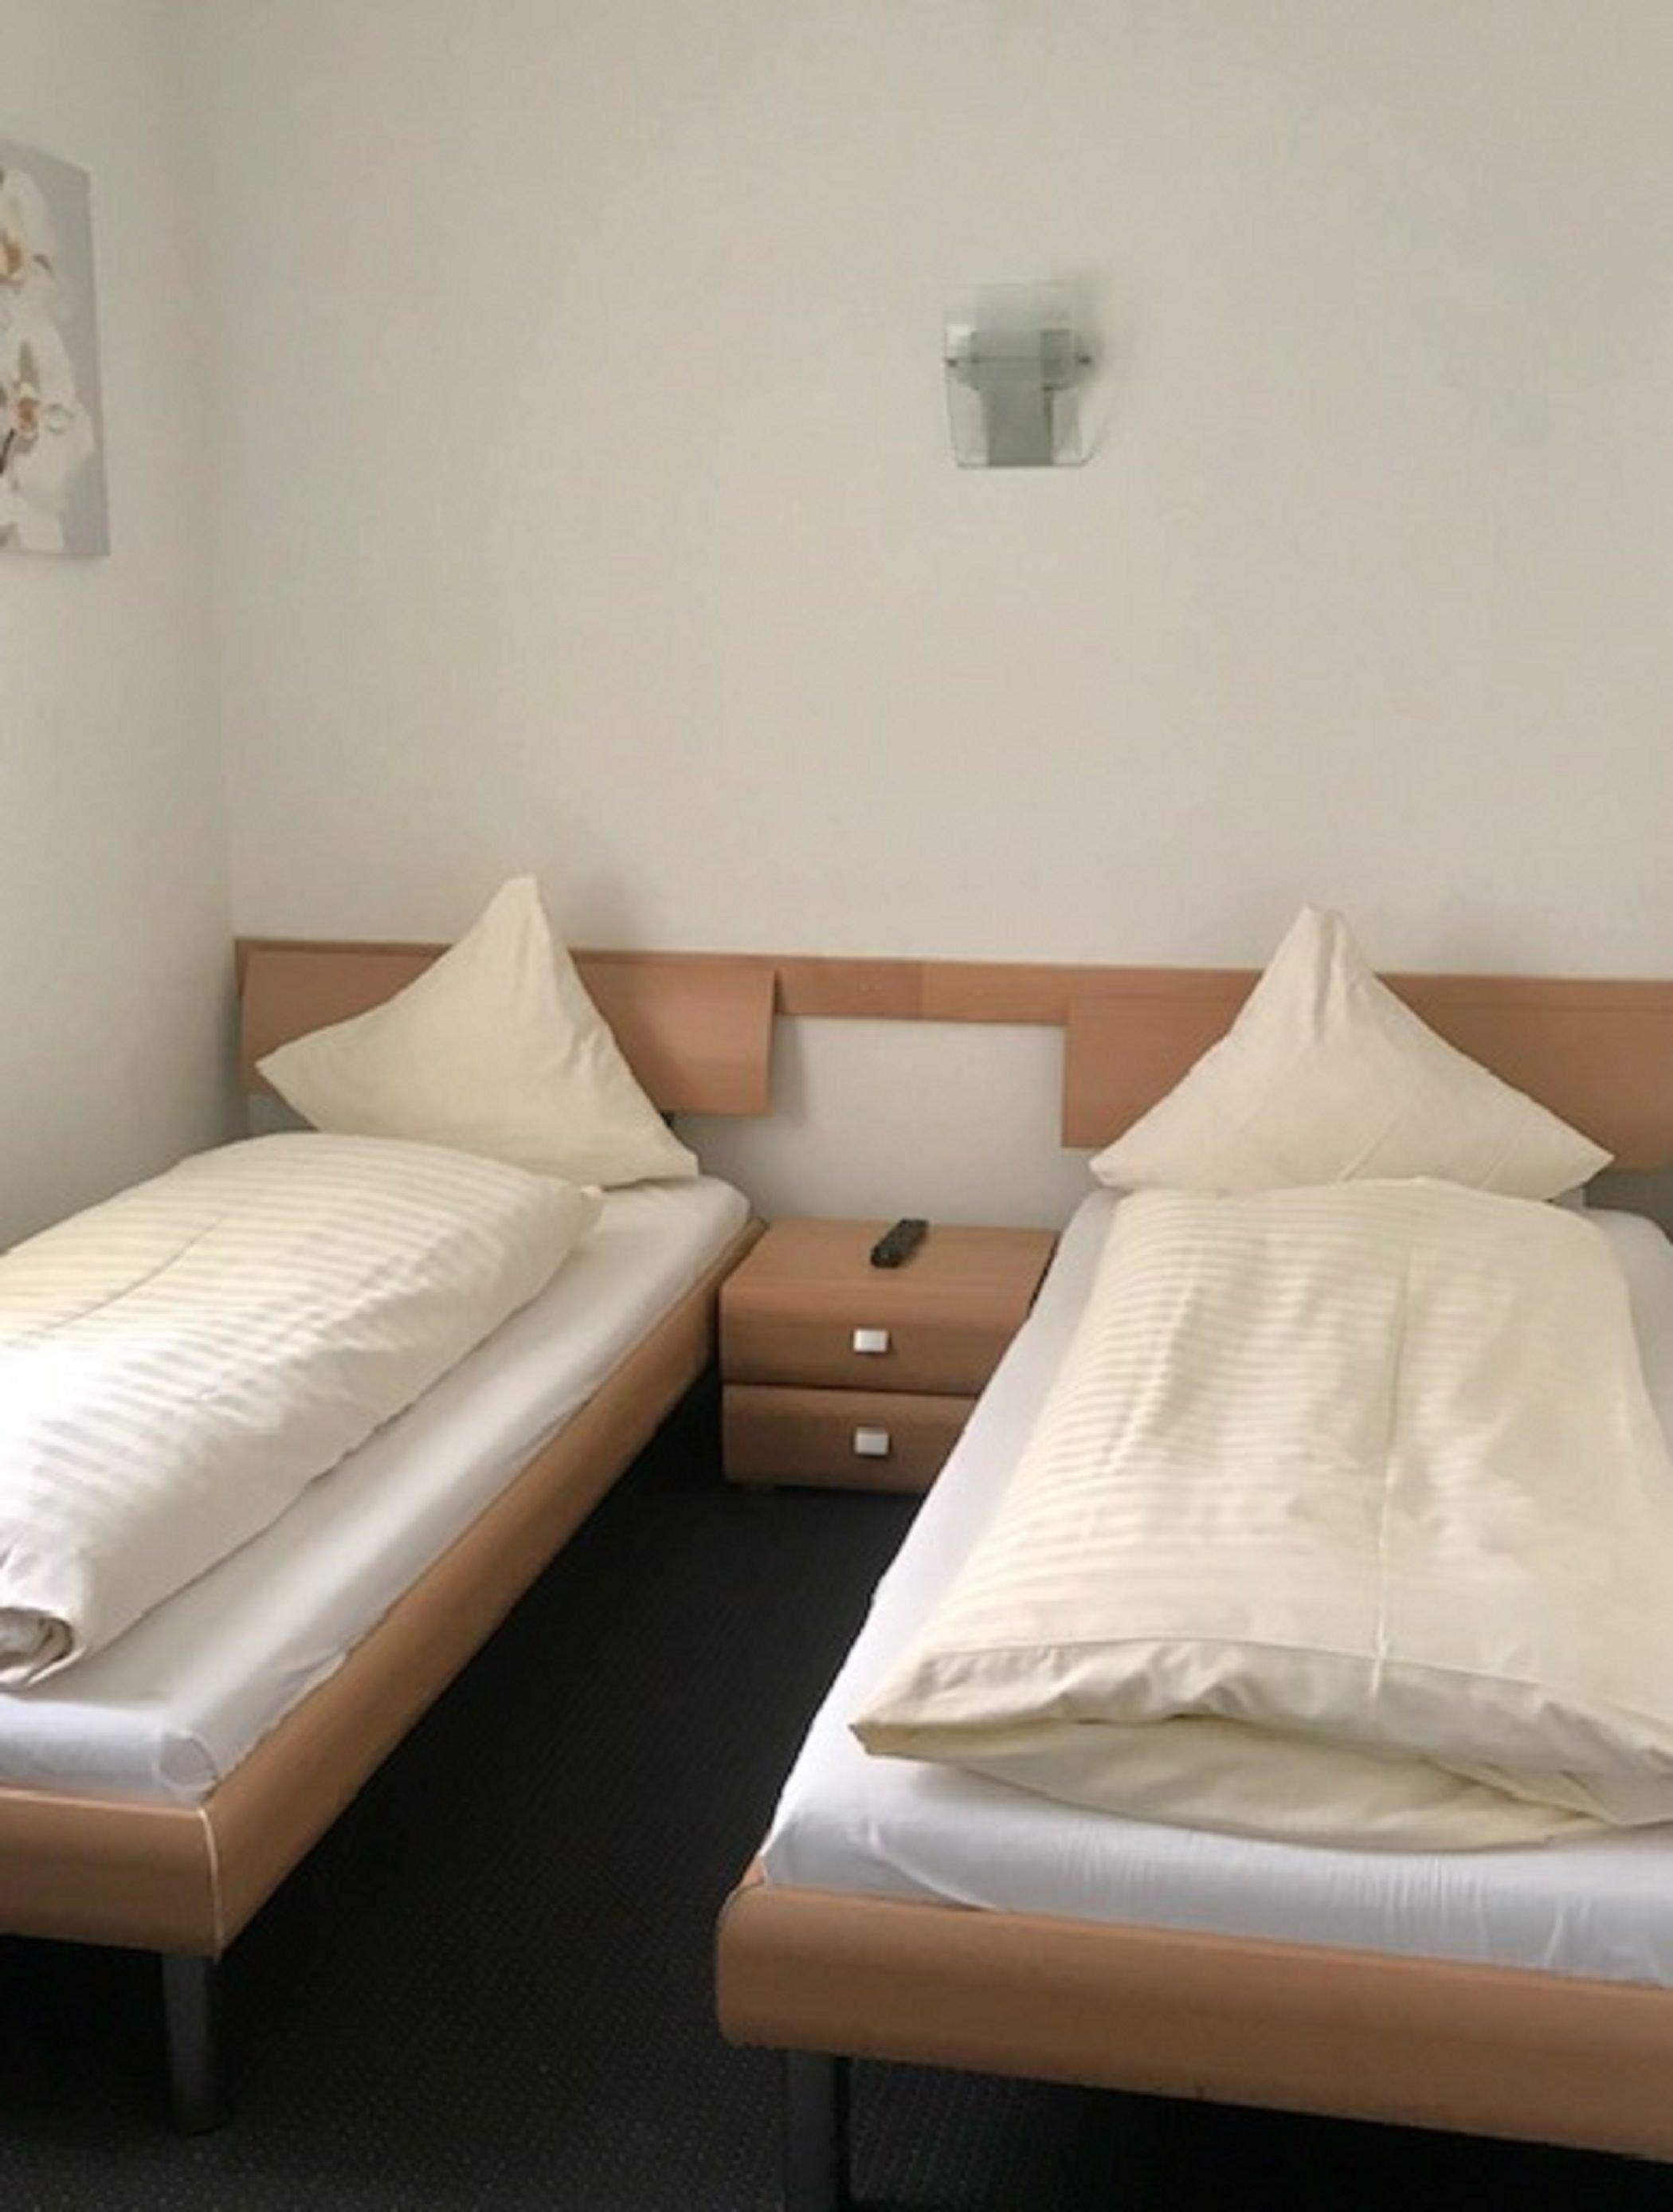 The Budget Double rooms, 2 separate beds, approx. 15 to 18 sqm, are equipped with a direct dial telephone, cable TV, a safe, free Wi-Fi and a hairdryer. The superior rooms are a bit bigger, about 20 to 22 sqm